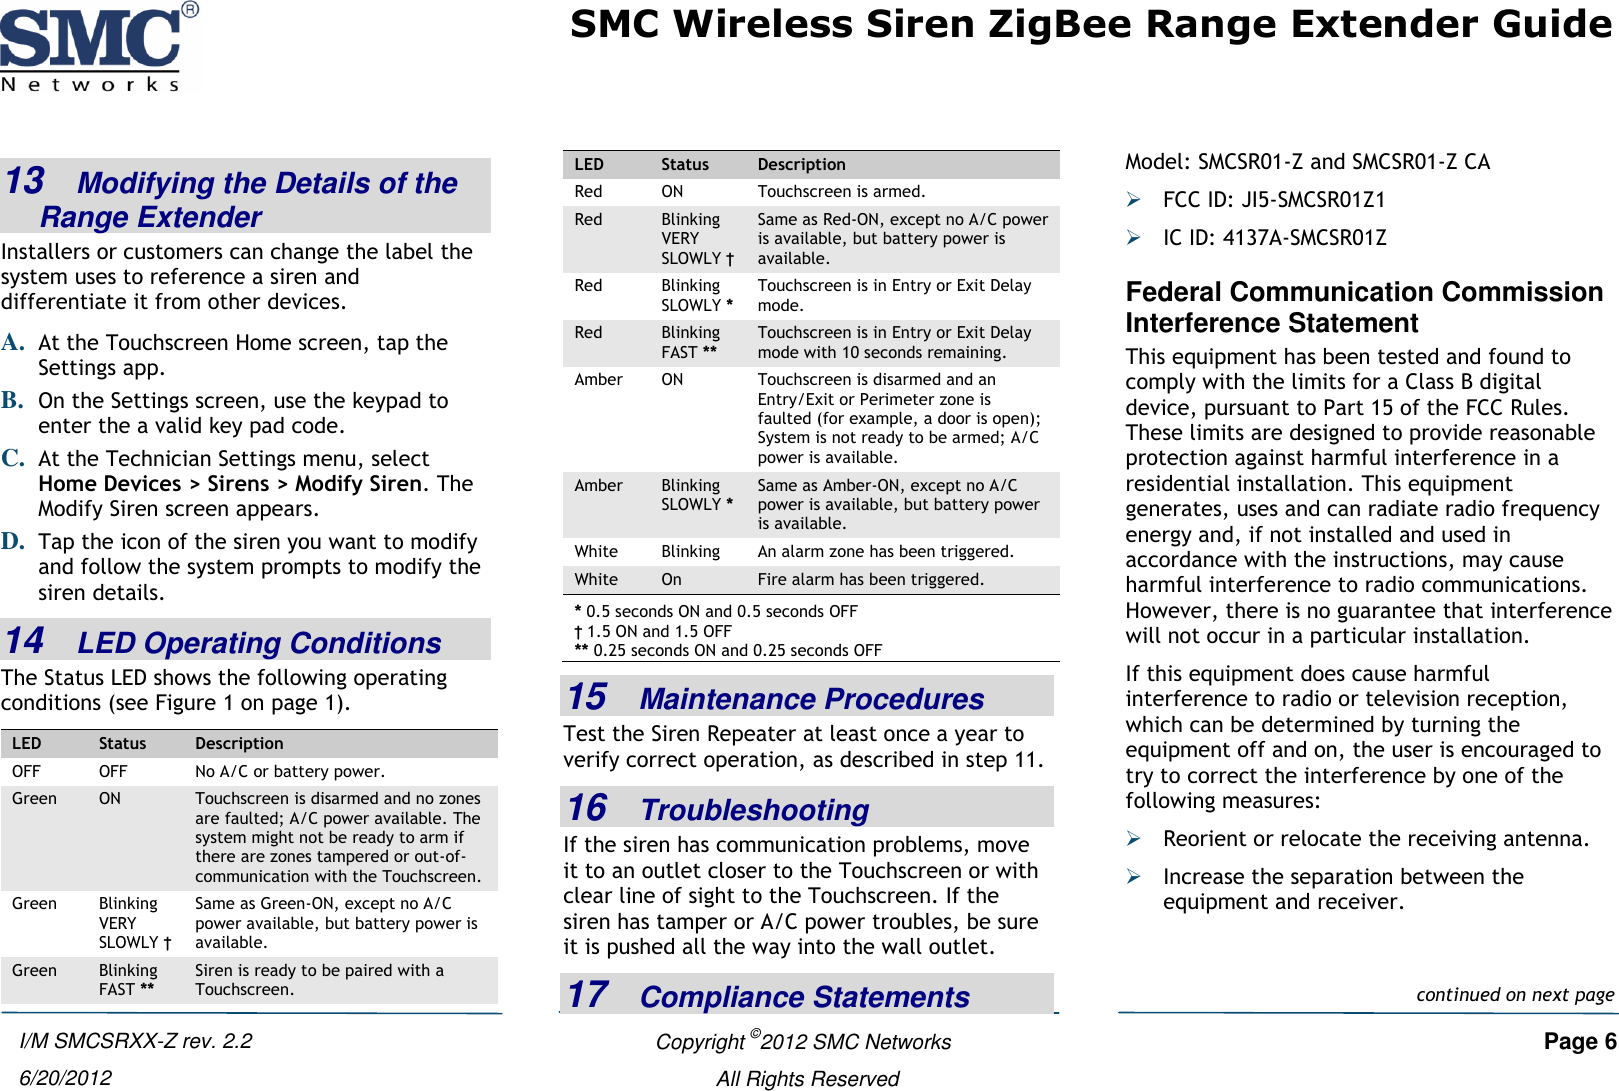 SMC Wireless Siren ZigBee Range Extender Guide   Copyright ©2012 SMC Networks   Page 6 All Rights Reserved I/M SMCSRXX-Z rev. 2.2 6/20/2012 13   Modifying the Details of the Range Extender Installers or customers can change the label the system uses to reference a siren and differentiate it from other devices. A. At the Touchscreen Home screen, tap the Settings app. B. On the Settings screen, use the keypad to enter the a valid key pad code.  C. At the Technician Settings menu, select Home Devices &gt; Sirens &gt; Modify Siren. The Modify Siren screen appears. D. Tap the icon of the siren you want to modify and follow the system prompts to modify the siren details.  14   LED Operating Conditions The Status LED shows the following operating conditions (see Figure 1 on page 1). LED Status Description OFF OFF No A/C or battery power. Green ON Touchscreen is disarmed and no zones are faulted; A/C power available. The system might not be ready to arm if there are zones tampered or out-of-communication with the Touchscreen. Green Blinking VERY SLOWLY † Same as Green-ON, except no A/C power available, but battery power is available. Green Blinking FAST ** Siren is ready to be paired with a Touchscreen. LED Status Description Red ON Touchscreen is armed. Red Blinking VERY SLOWLY † Same as Red-ON, except no A/C power is available, but battery power is available. Red Blinking SLOWLY * Touchscreen is in Entry or Exit Delay mode. Red Blinking FAST ** Touchscreen is in Entry or Exit Delay mode with 10 seconds remaining. Amber ON Touchscreen is disarmed and an Entry/Exit or Perimeter zone is faulted (for example, a door is open); System is not ready to be armed; A/C power is available. Amber Blinking SLOWLY * Same as Amber-ON, except no A/C power is available, but battery power is available. White Blinking An alarm zone has been triggered. White On Fire alarm has been triggered. * 0.5 seconds ON and 0.5 seconds OFF † 1.5 ON and 1.5 OFF ** 0.25 seconds ON and 0.25 seconds OFF 15   Maintenance Procedures Test the Siren Repeater at least once a year to verify correct operation, as described in step 11. 16   Troubleshooting If the siren has communication problems, move it to an outlet closer to the Touchscreen or with clear line of sight to the Touchscreen. If the siren has tamper or A/C power troubles, be sure it is pushed all the way into the wall outlet. 17   Compliance Statements Model: SMCSR01-Z and SMCSR01-Z CA  FCC ID: JI5-SMCSR01Z1  IC ID: 4137A-SMCSR01Z Federal Communication Commission Interference Statement This equipment has been tested and found to comply with the limits for a Class B digital device, pursuant to Part 15 of the FCC Rules. These limits are designed to provide reasonable protection against harmful interference in a residential installation. This equipment generates, uses and can radiate radio frequency energy and, if not installed and used in accordance with the instructions, may cause harmful interference to radio communications. However, there is no guarantee that interference will not occur in a particular installation.  If this equipment does cause harmful interference to radio or television reception, which can be determined by turning the equipment off and on, the user is encouraged to try to correct the interference by one of the following measures:  Reorient or relocate the receiving antenna.  Increase the separation between the equipment and receiver.continued on next page 